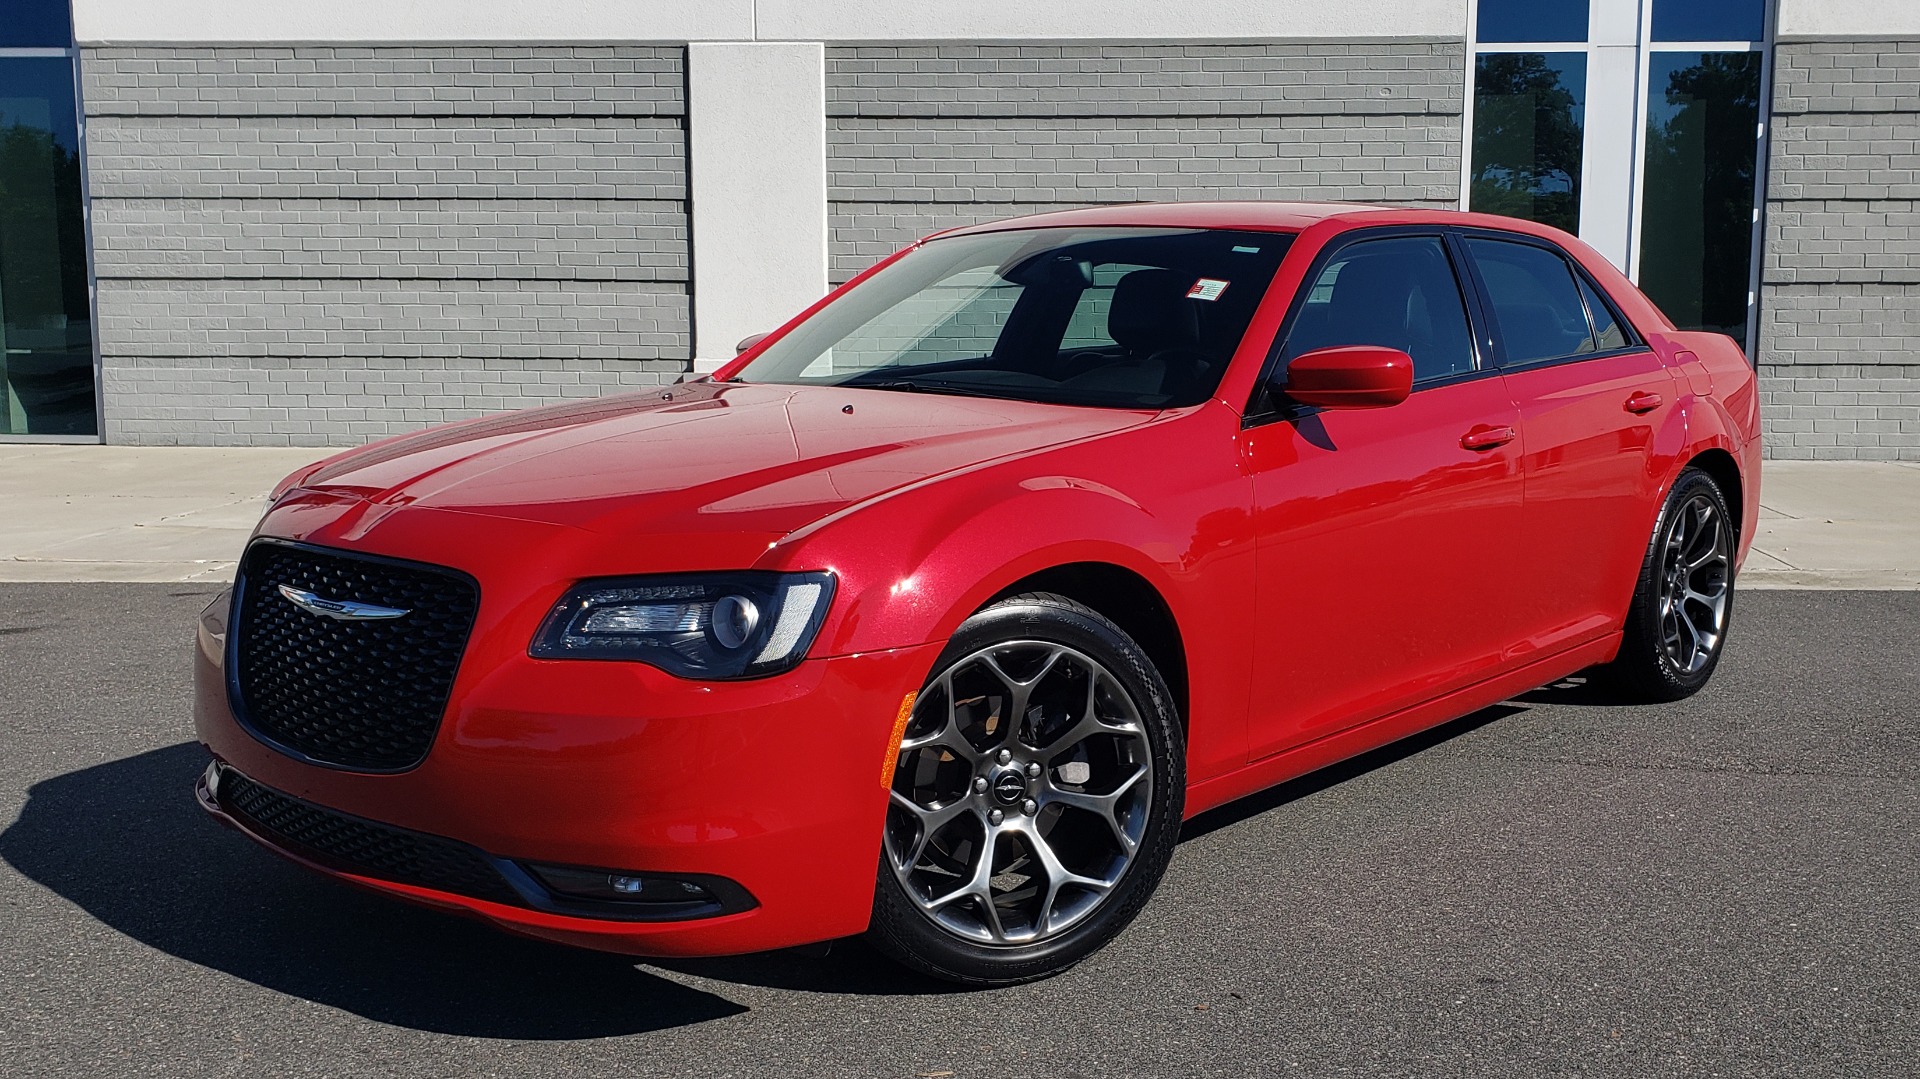 Used 2015 Chrysler 300 S / 3.6L V6 / 8-SPD AUTO / NAV / BEATS AUDIO / HTS STS / REARVIE for sale Sold at Formula Imports in Charlotte NC 28227 1